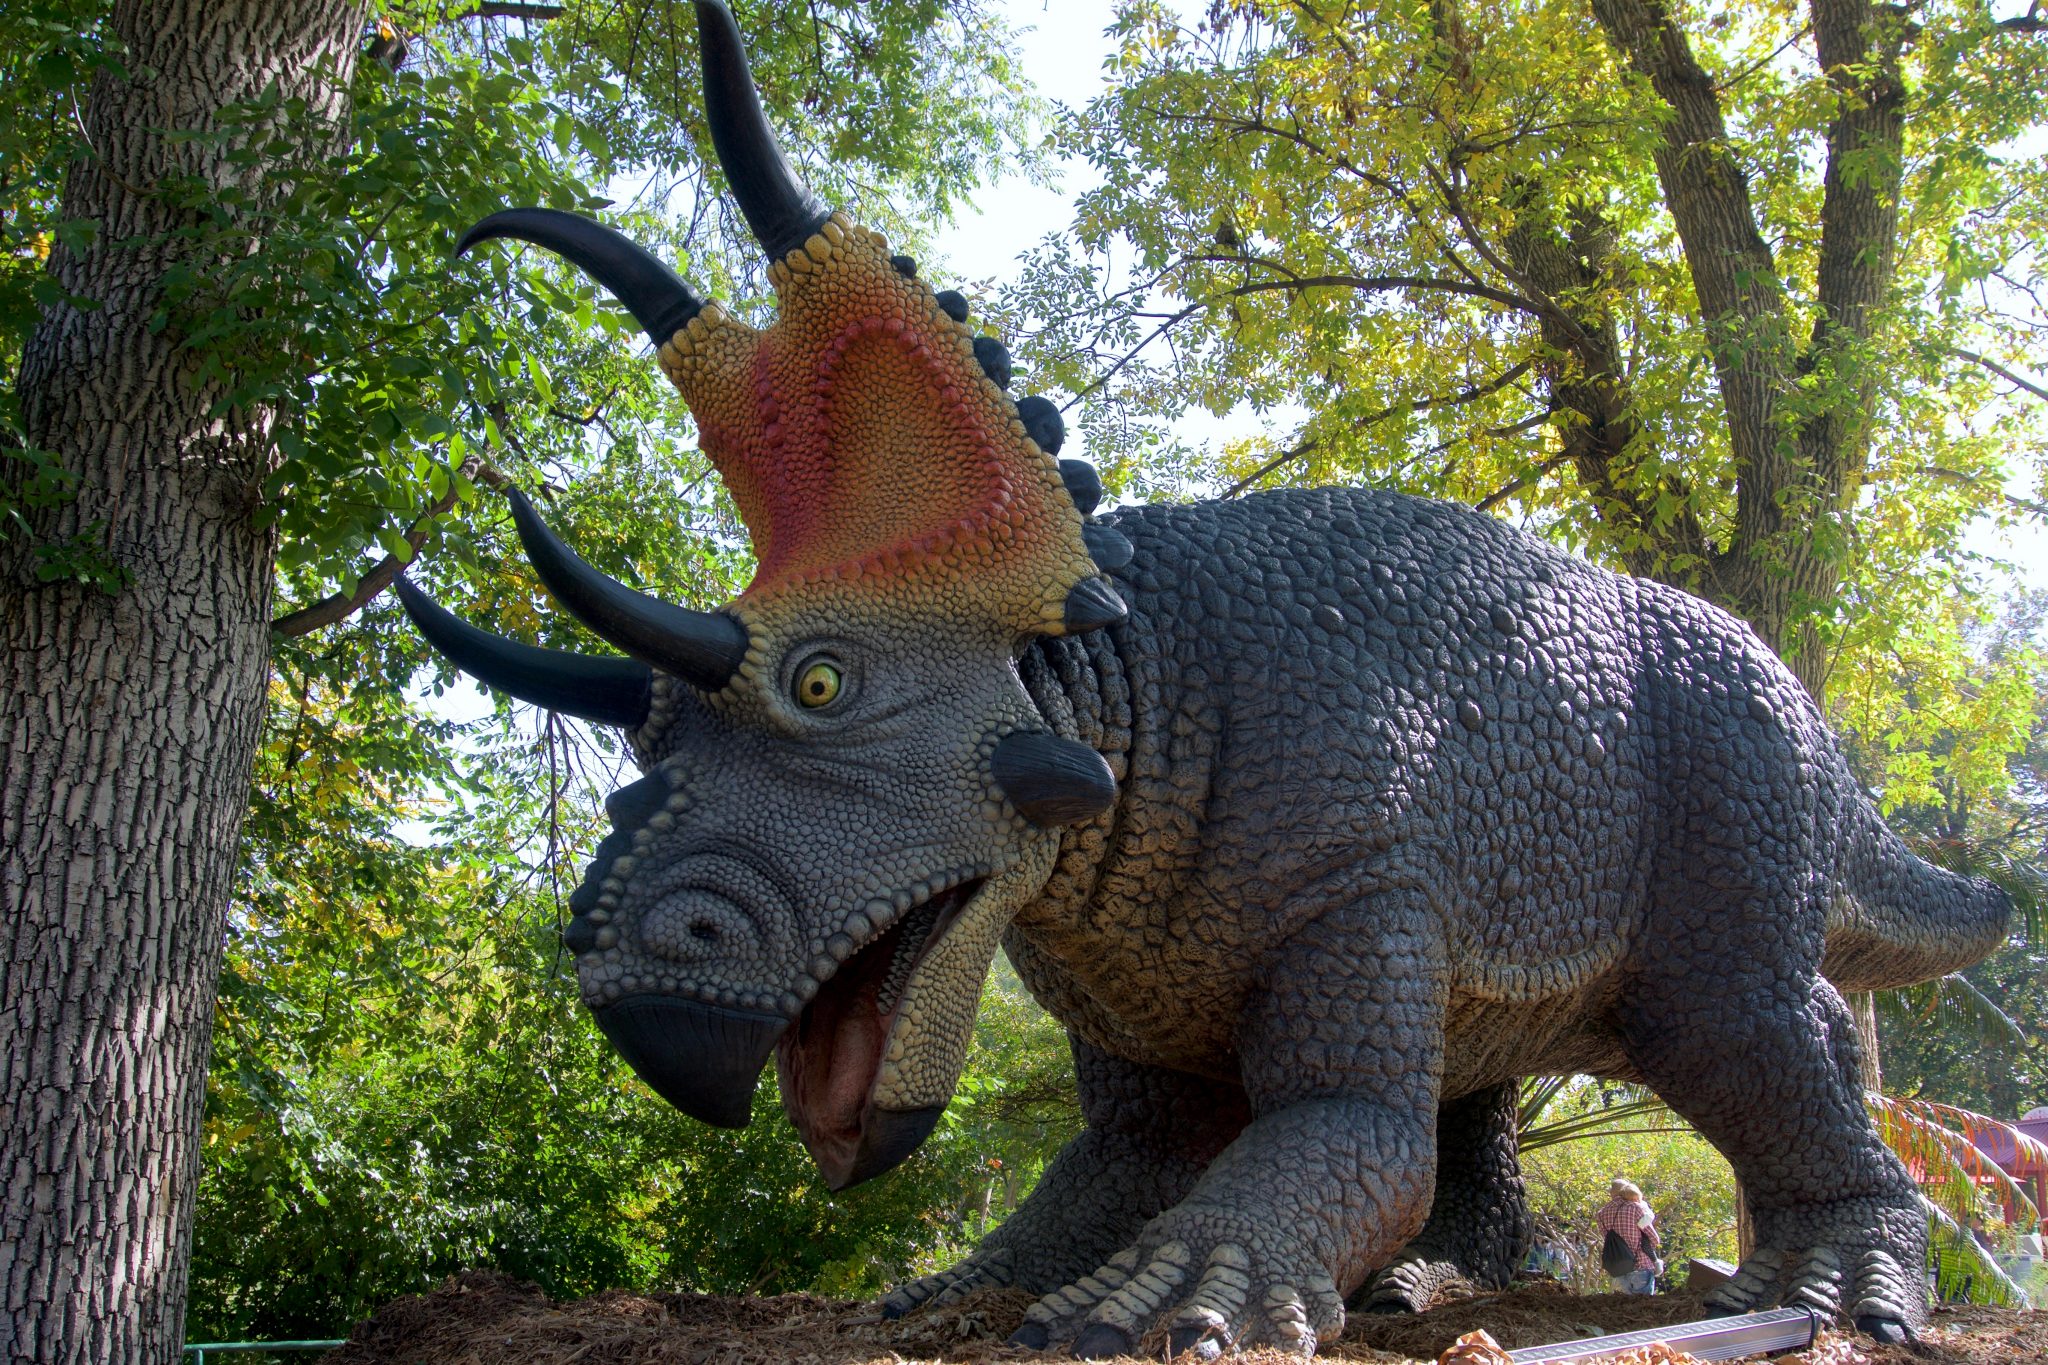 Xpedition-Dino-Dinosaurs-at-six-flags-great-adventure-Diabloceratops